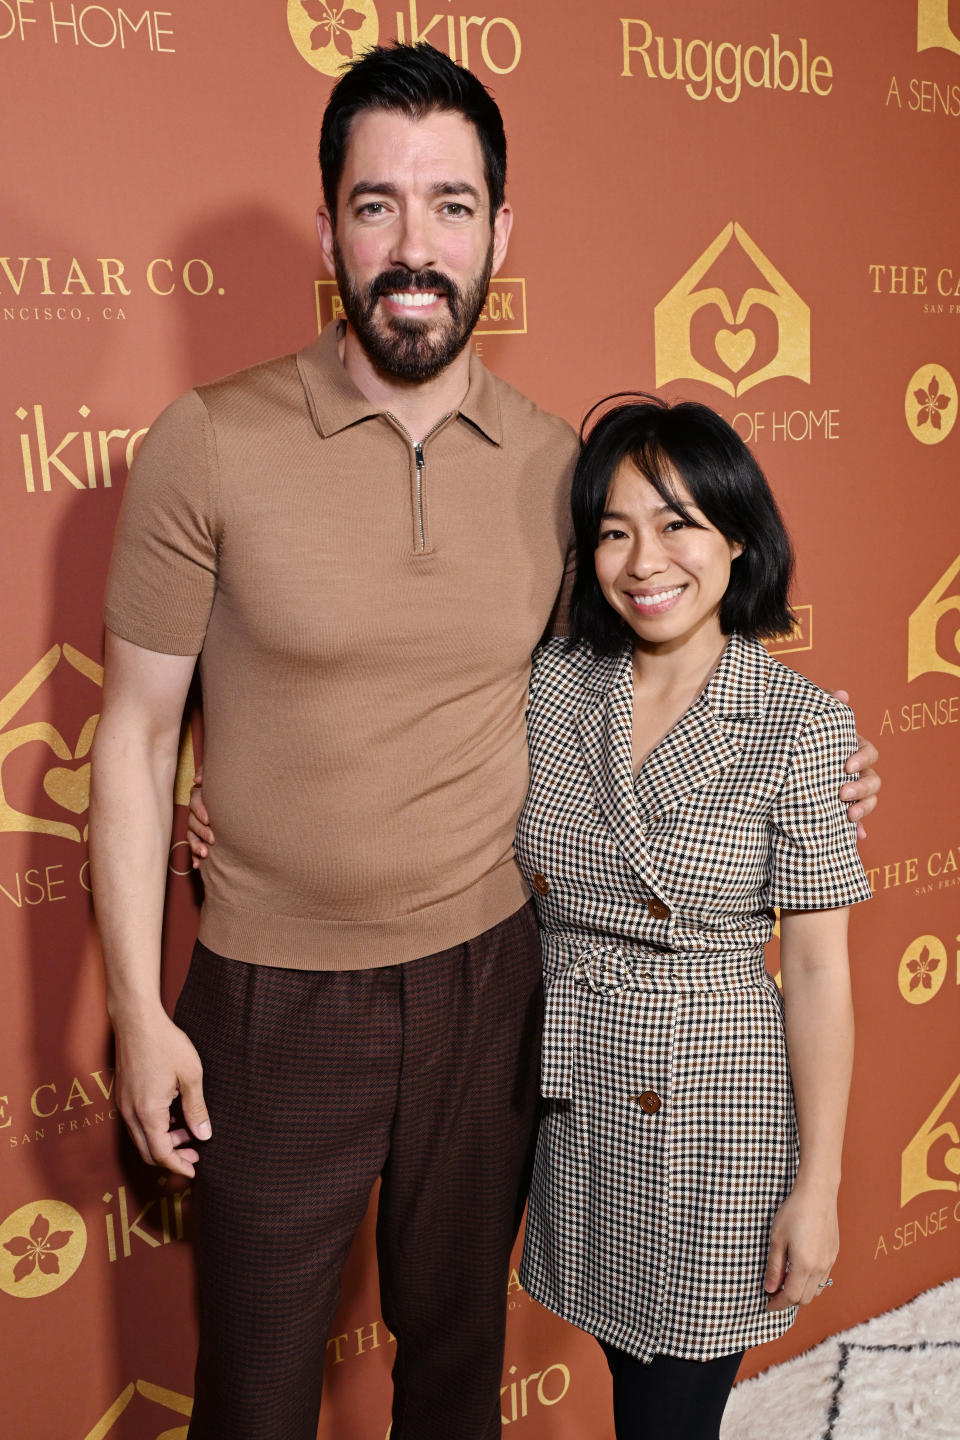 LOS ANGELES, CALIFORNIA - OCTOBER 21: (L-R) Drew Scott and   Linda Phan attendA Sense of Home Gala 2023 at Private Residence on October 21, 2023 in Los Angeles, California. (Photo by Michael Kovac/Getty Images for A Sense of Home)